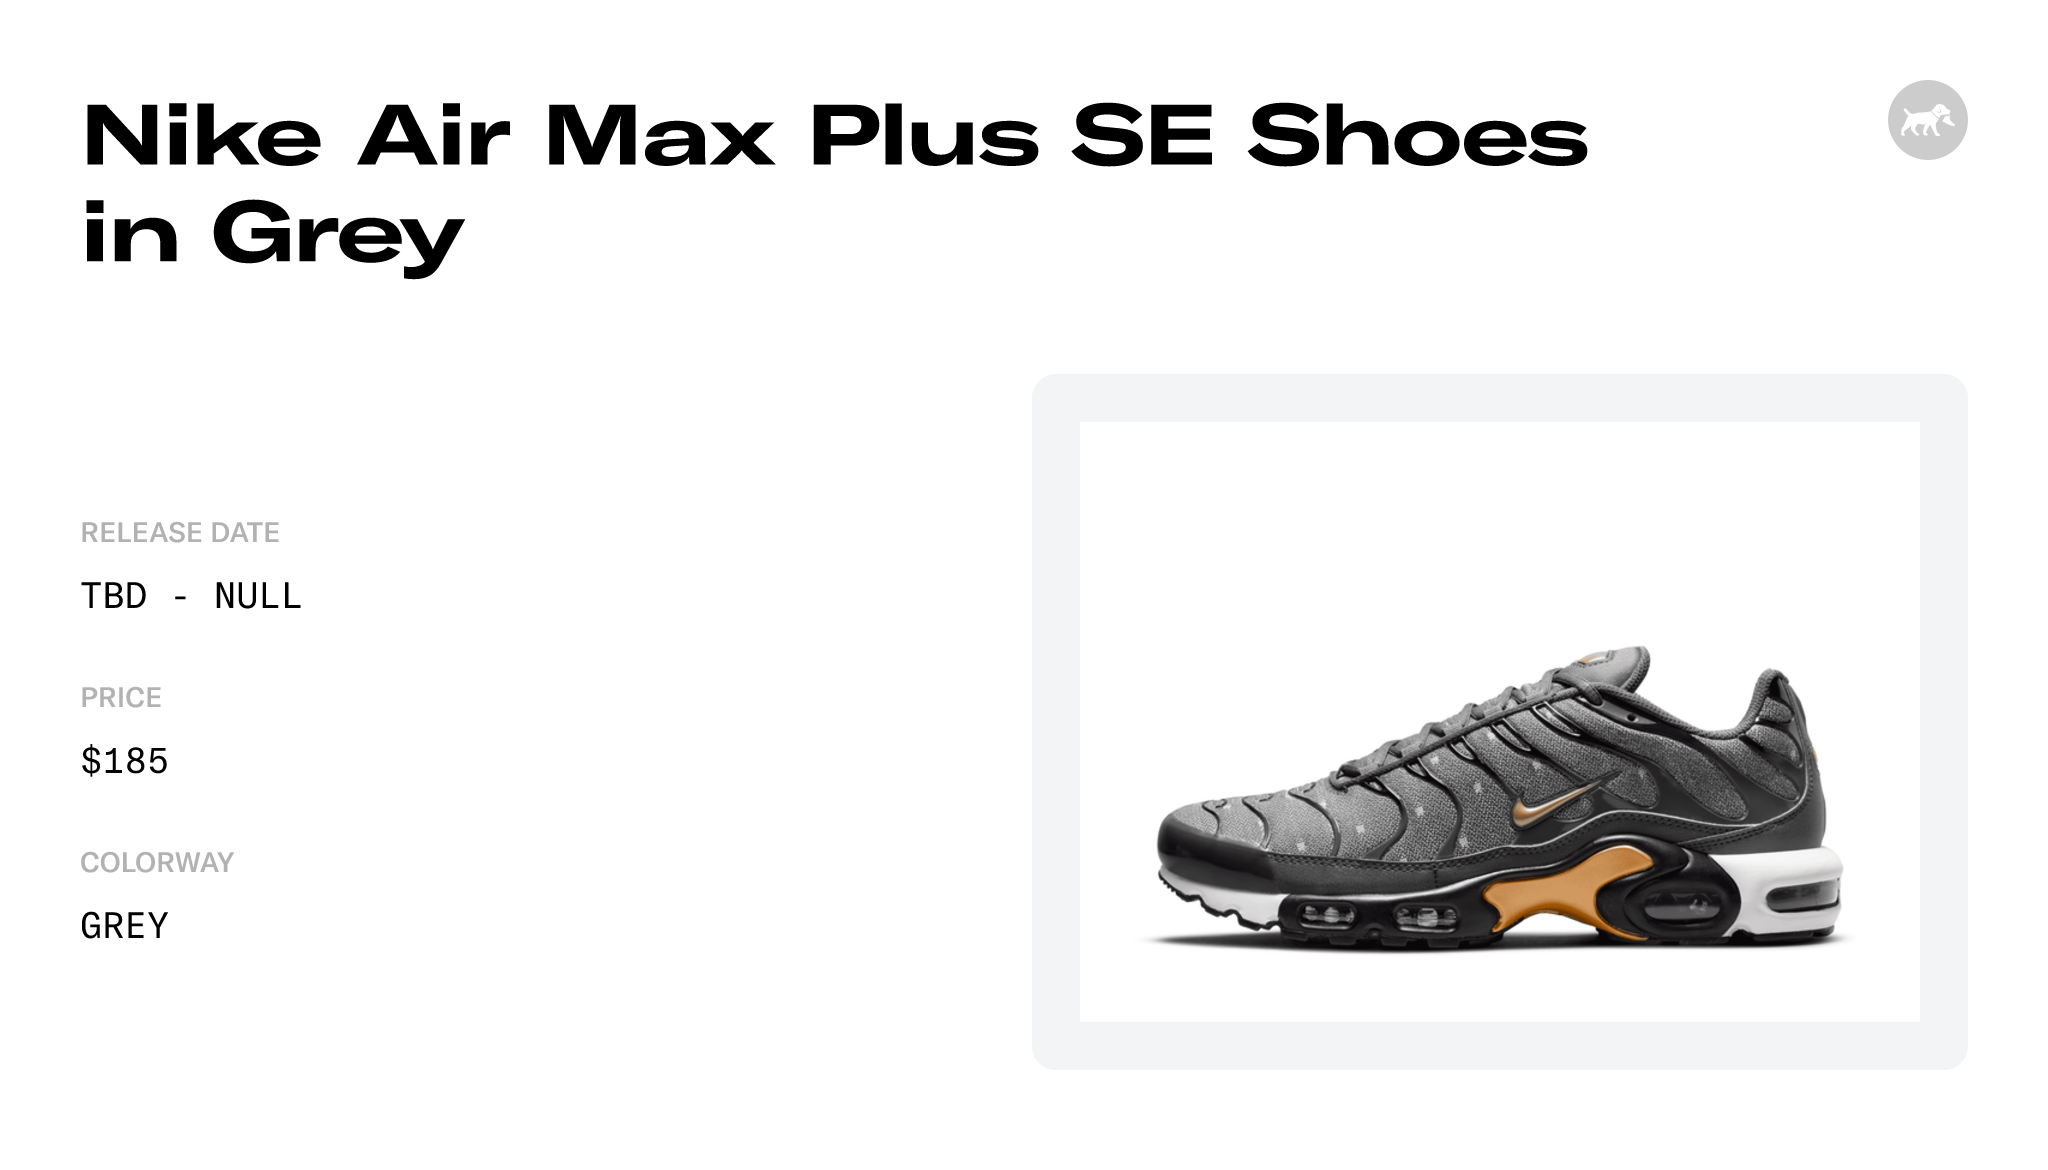 Nike Air Max Plus SE Shoes in Grey - DM7570-002 Raffles and Release Date